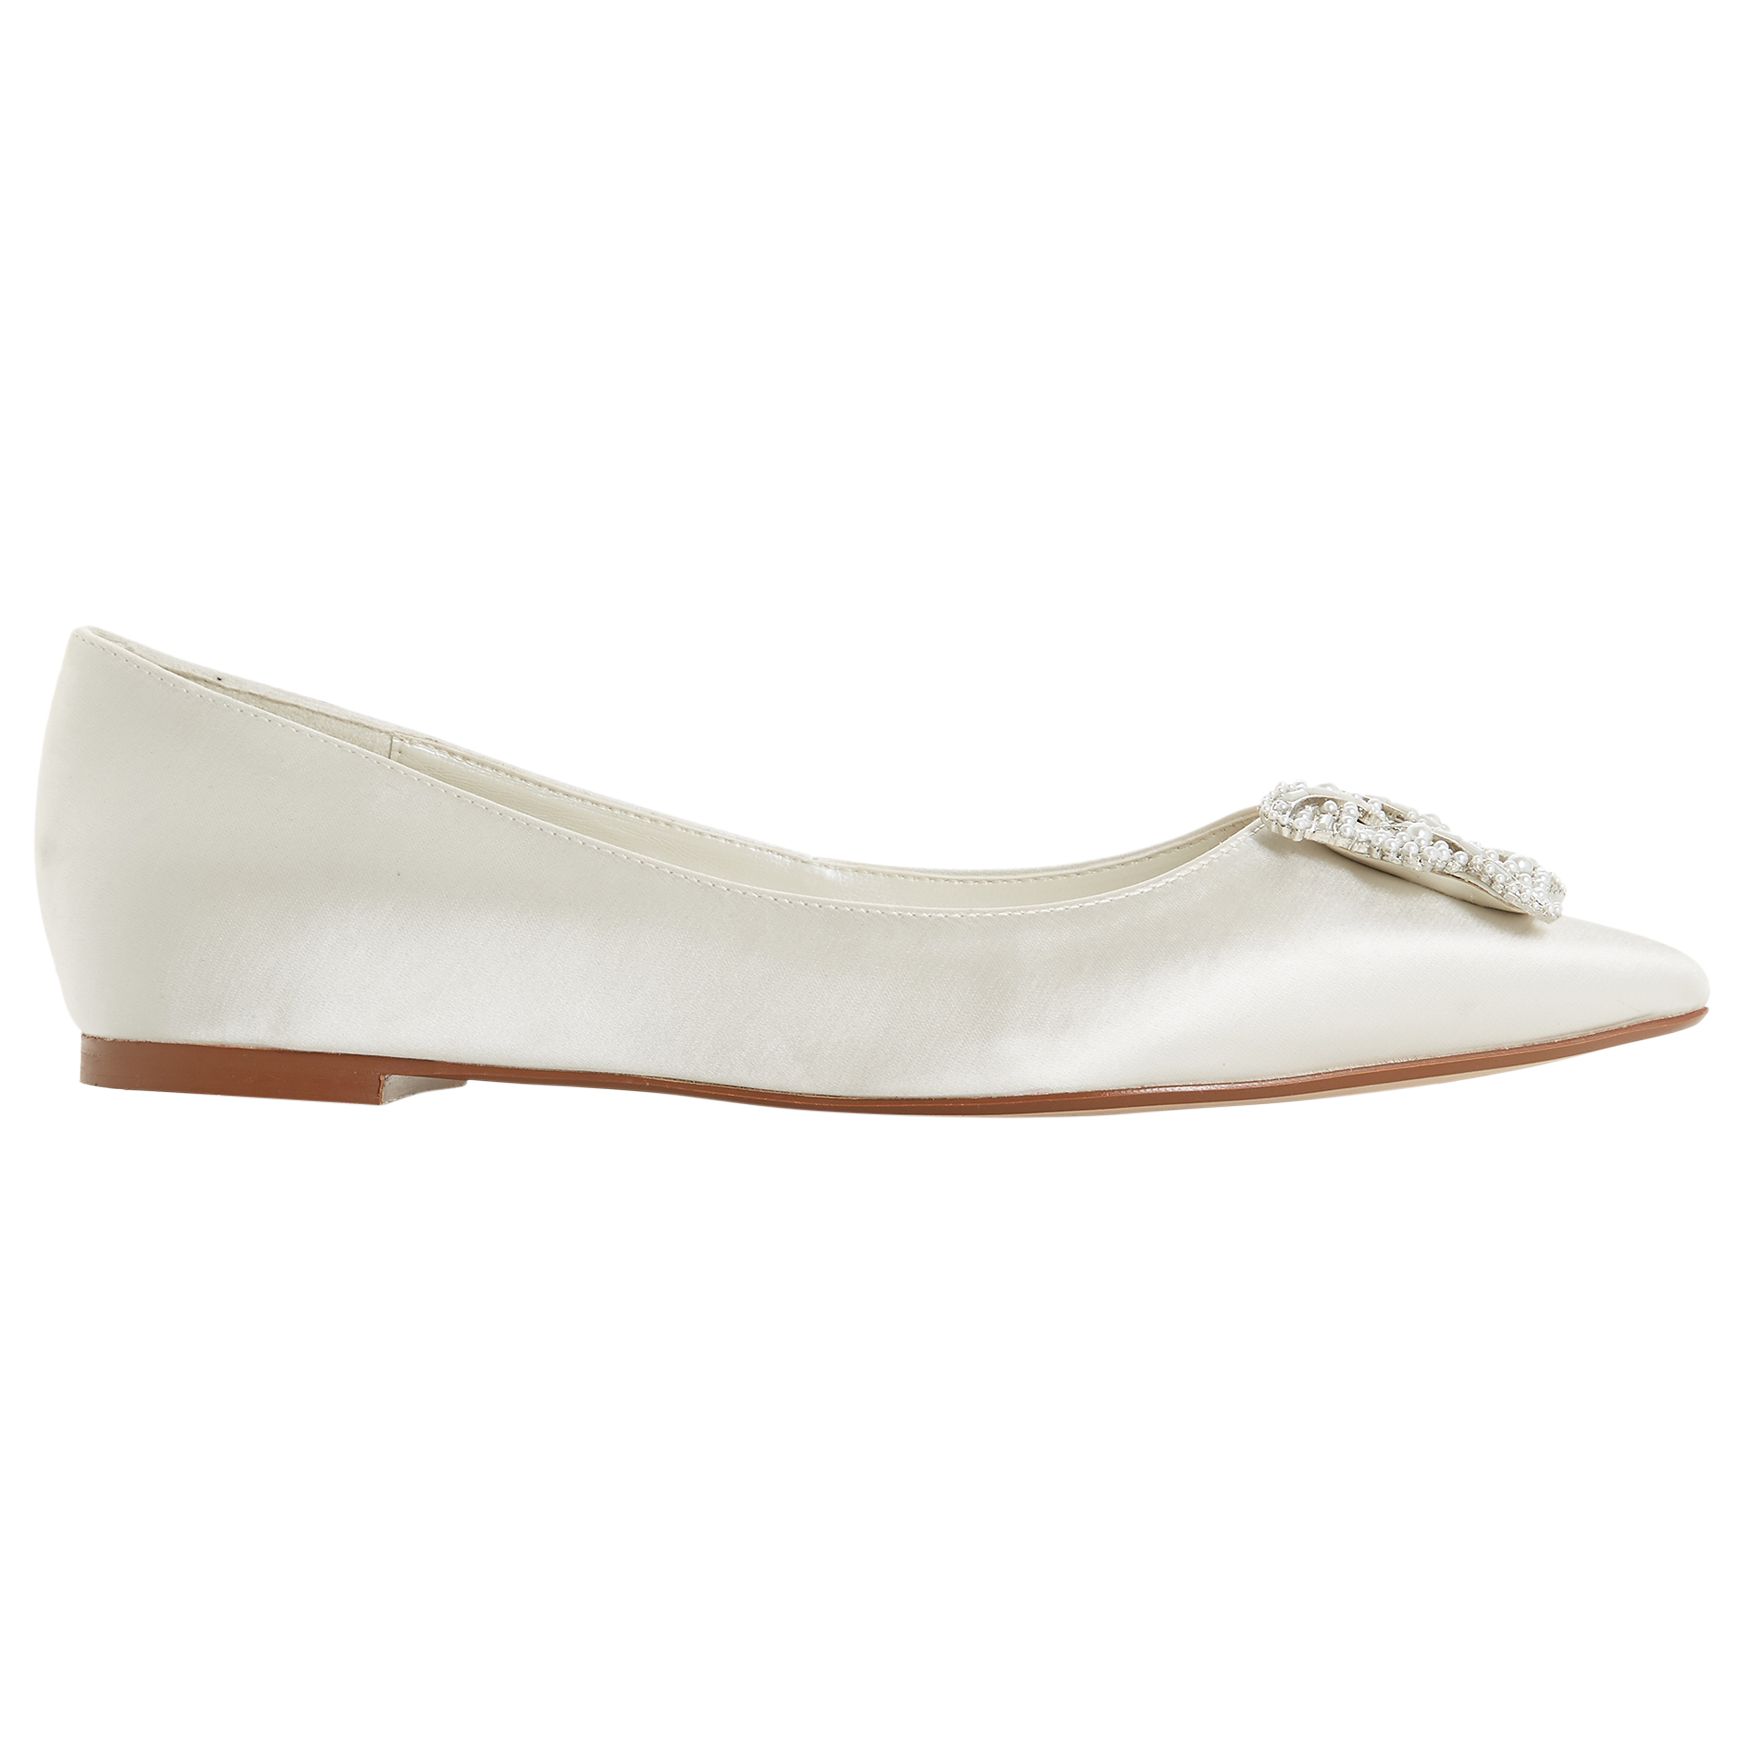 Dune Bridal Collection Brielee Jewel Ballet Pumps, Ivory